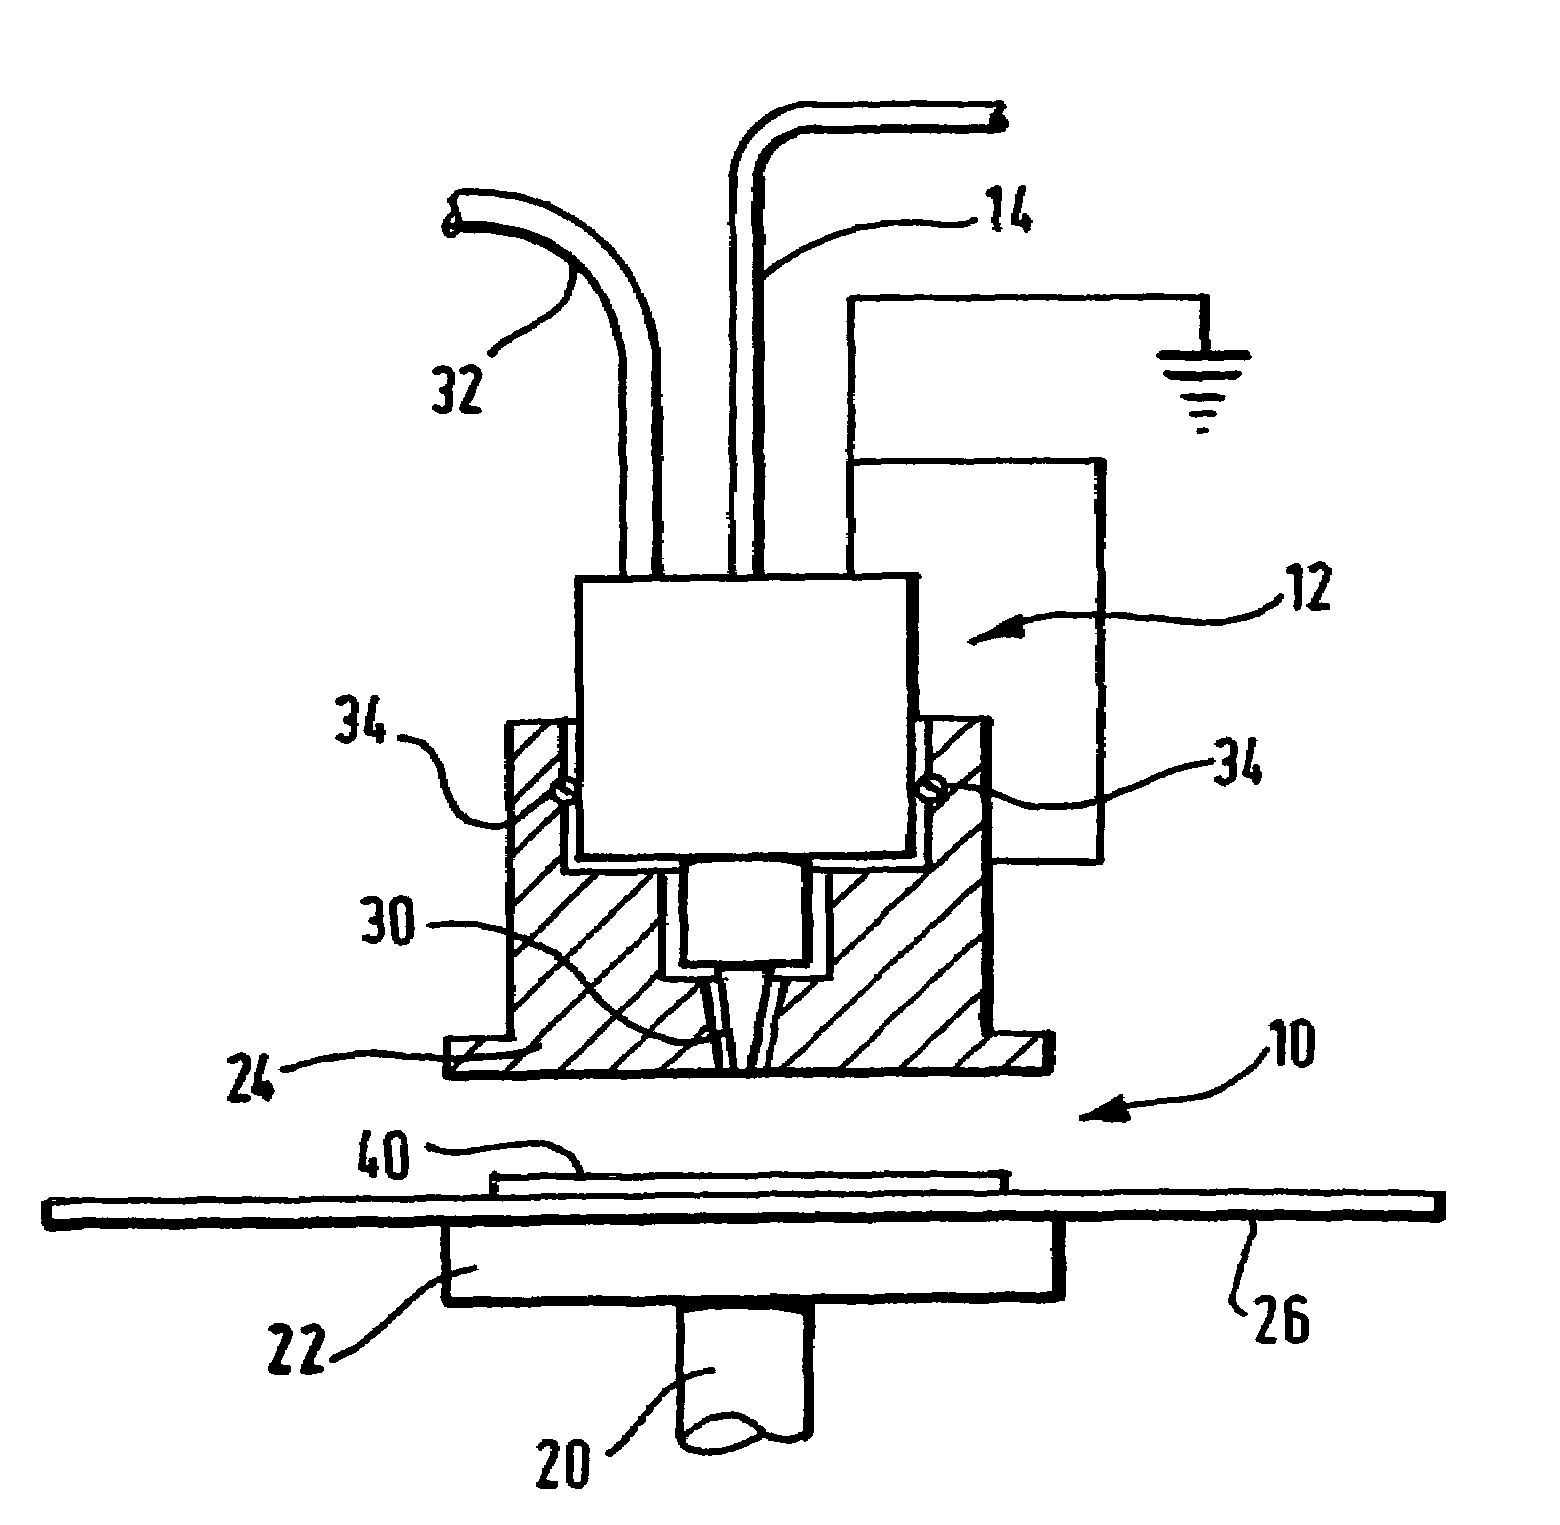 Method and apparatus for forming a coating